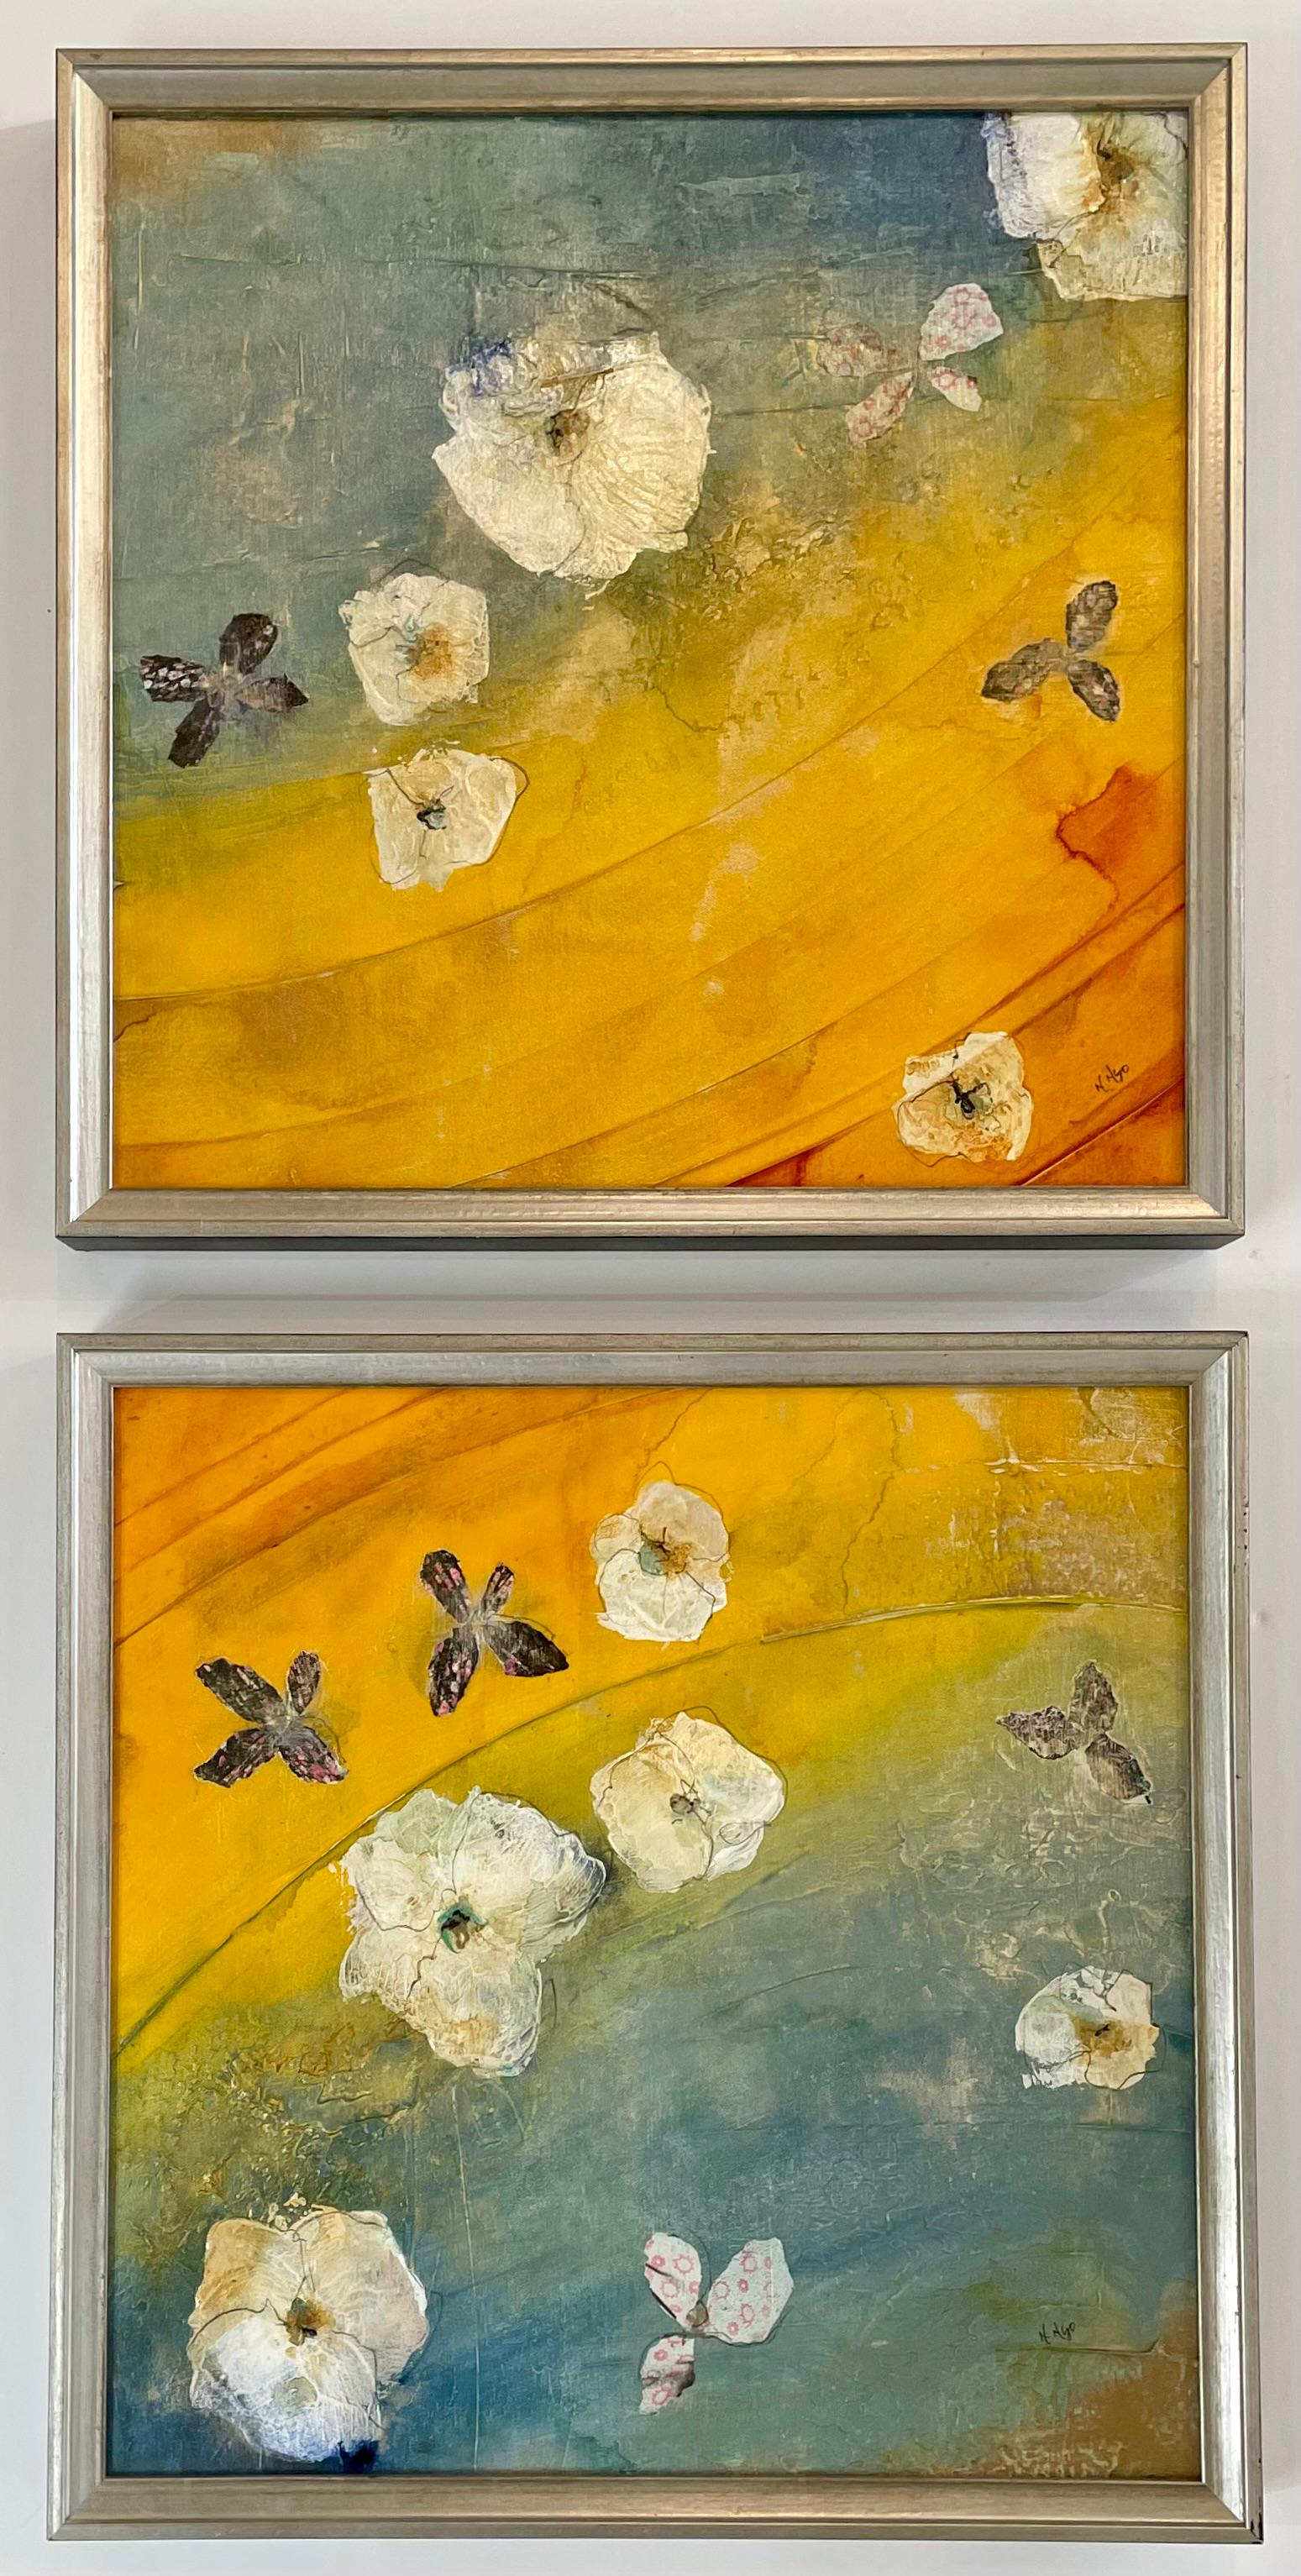 Nancy Ngo Abstract Painting - "Floating Flowers III & IV" - Highly Textured, Abstract Florals on Canvas